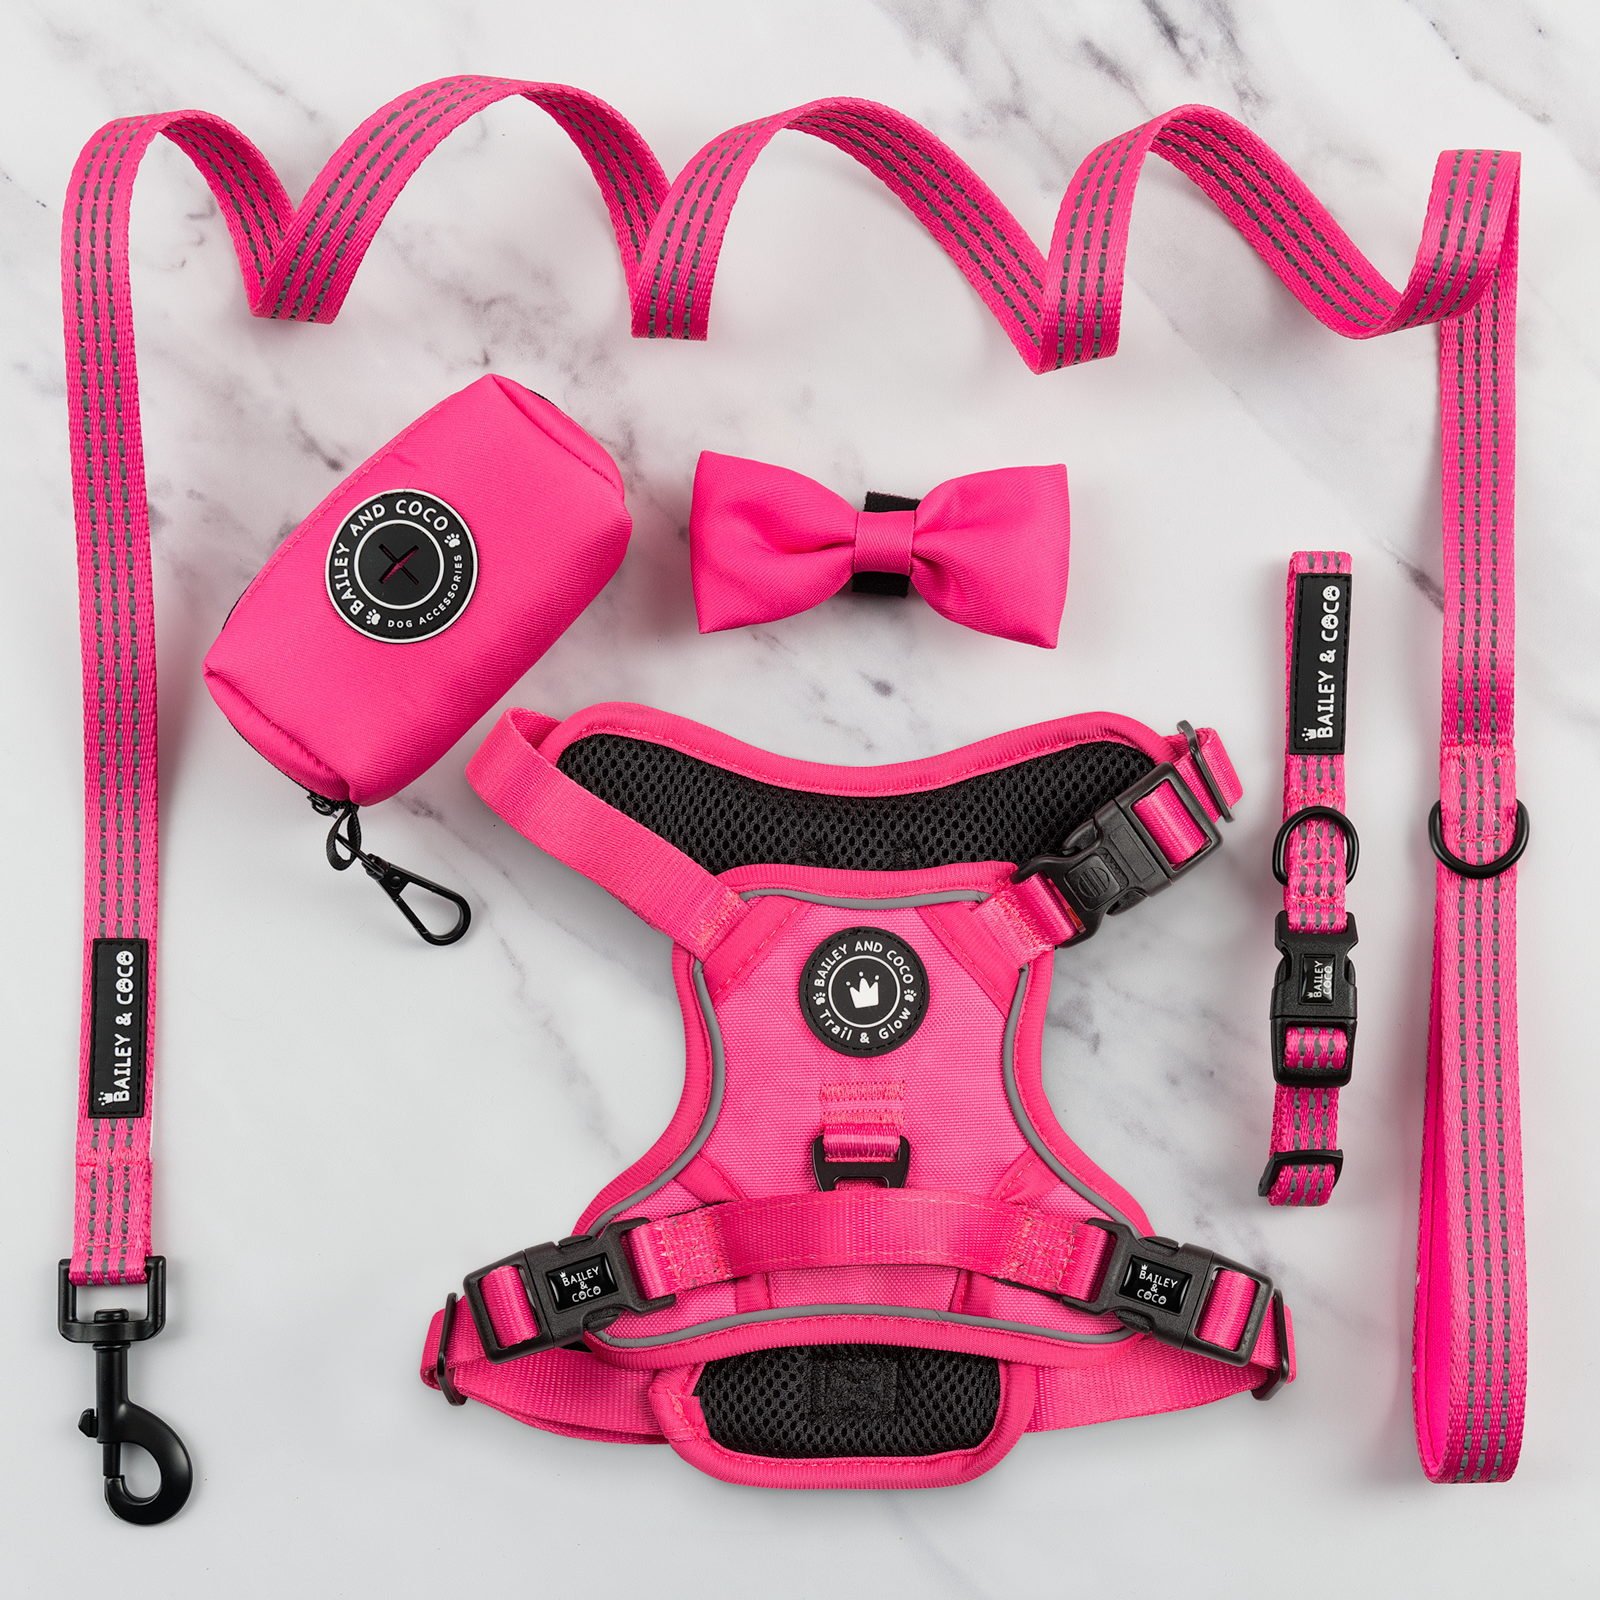 The Hot Pink One